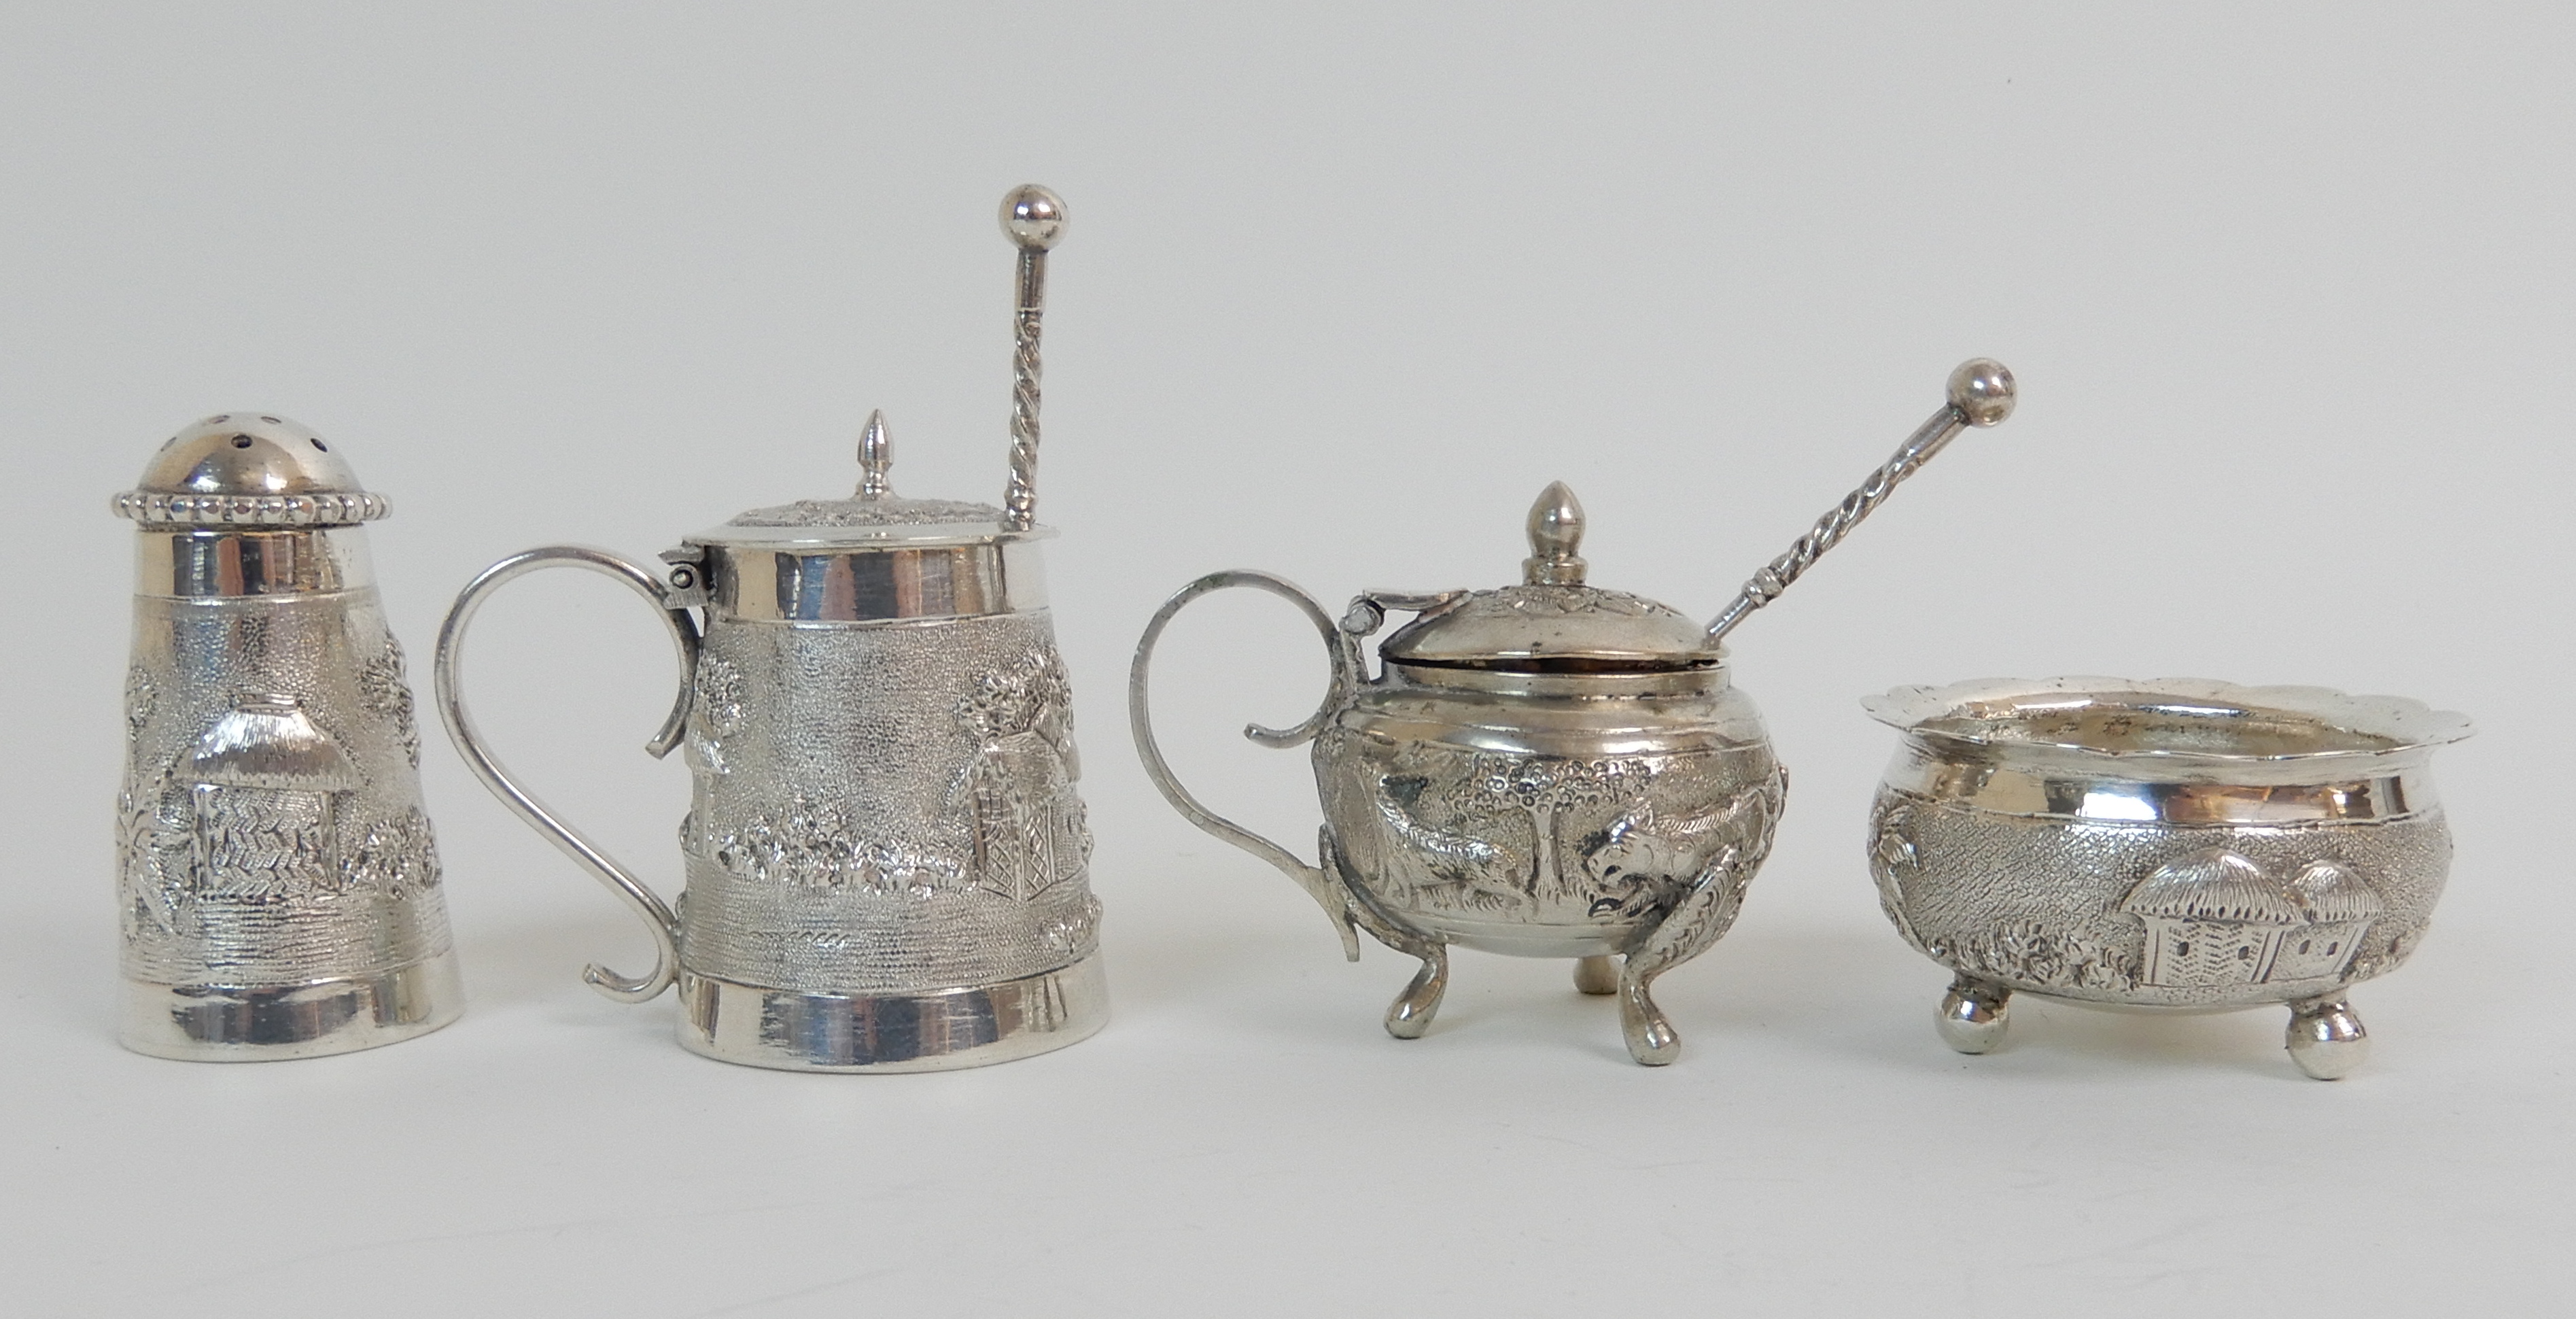 FOUR BURMESE EXPORT SILVER CONDIMENTS comprising two mustard pots, a salt and a pepperette with - Image 3 of 6